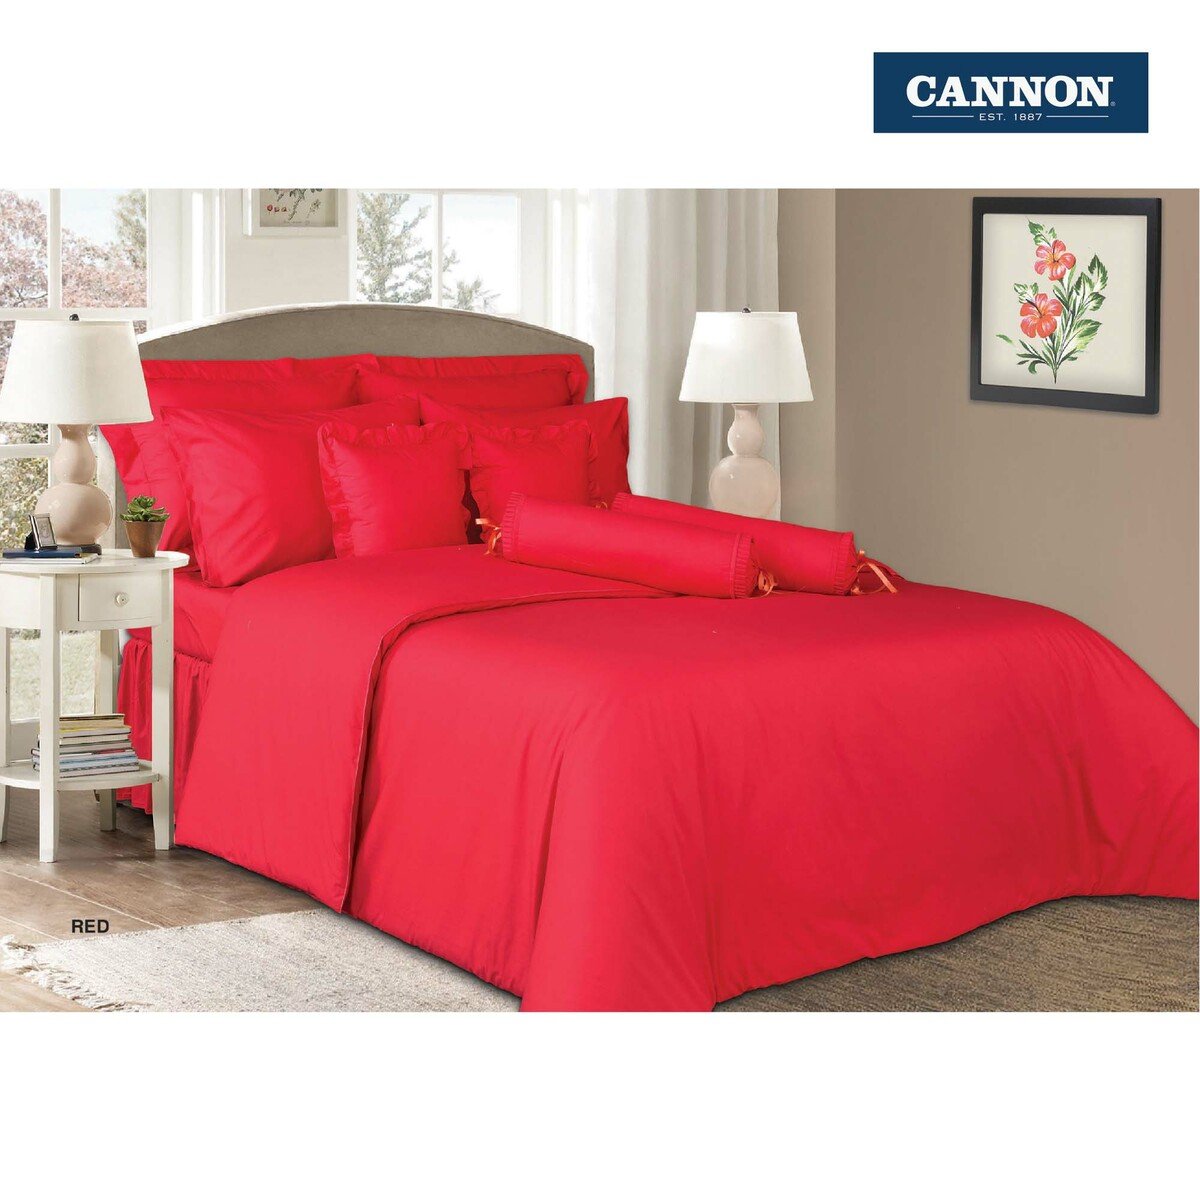 Cannon Comforter Plain King 220x240cm Red